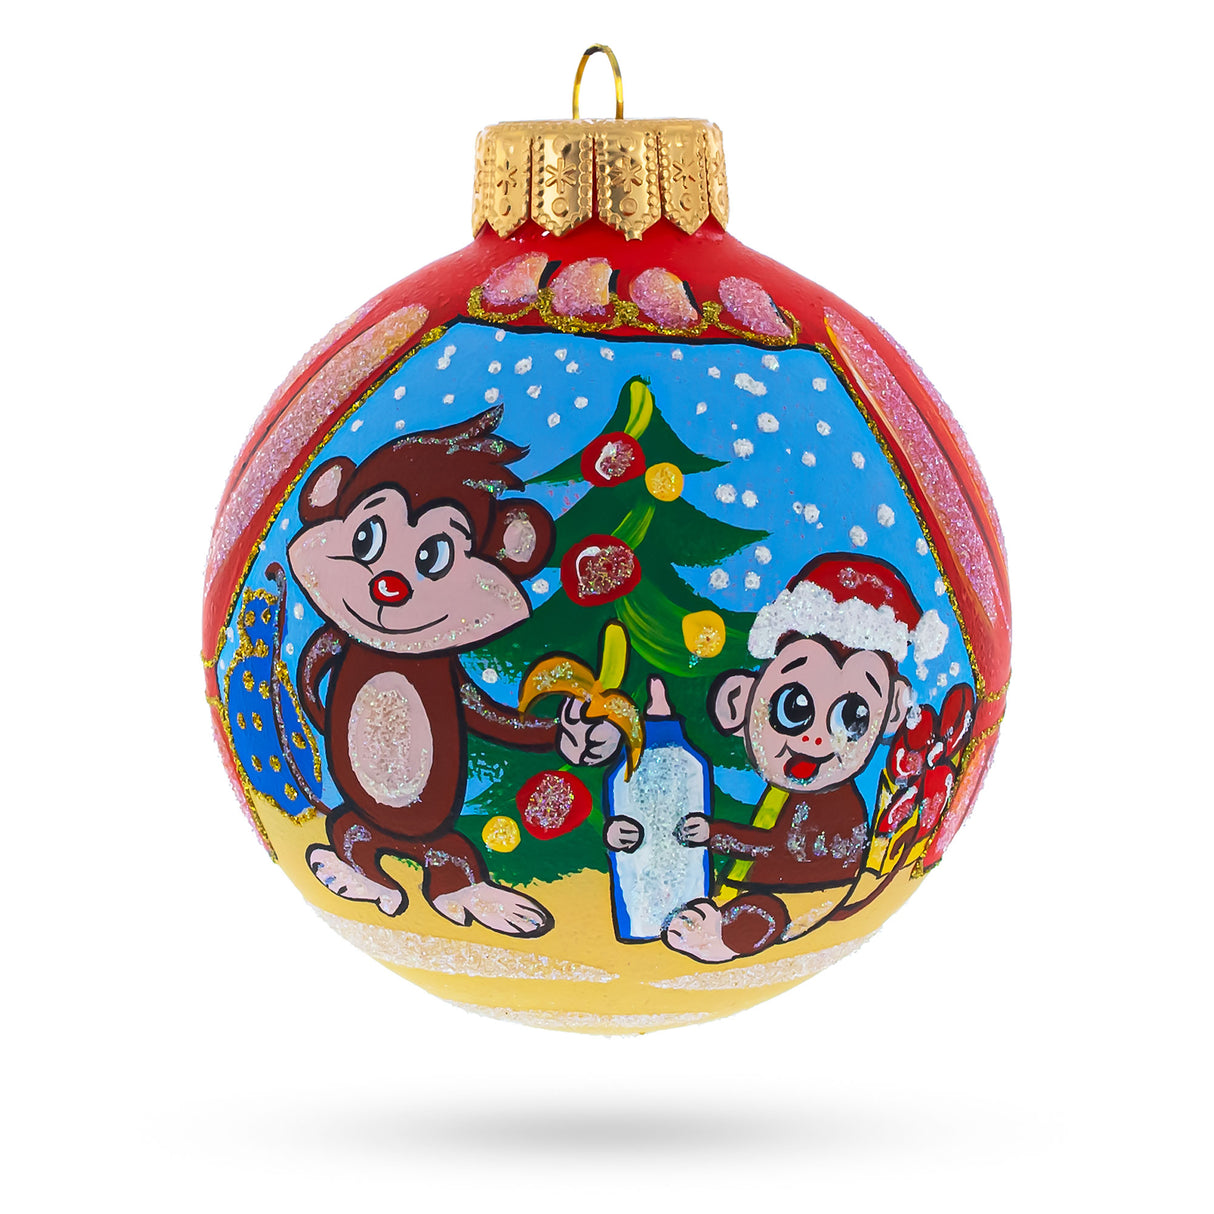 Heartwarming Monkey and Baby by Christmas Tree - Artisan Blown Glass Ball Christmas Ornament 4 Inches in Multi color, Round shape